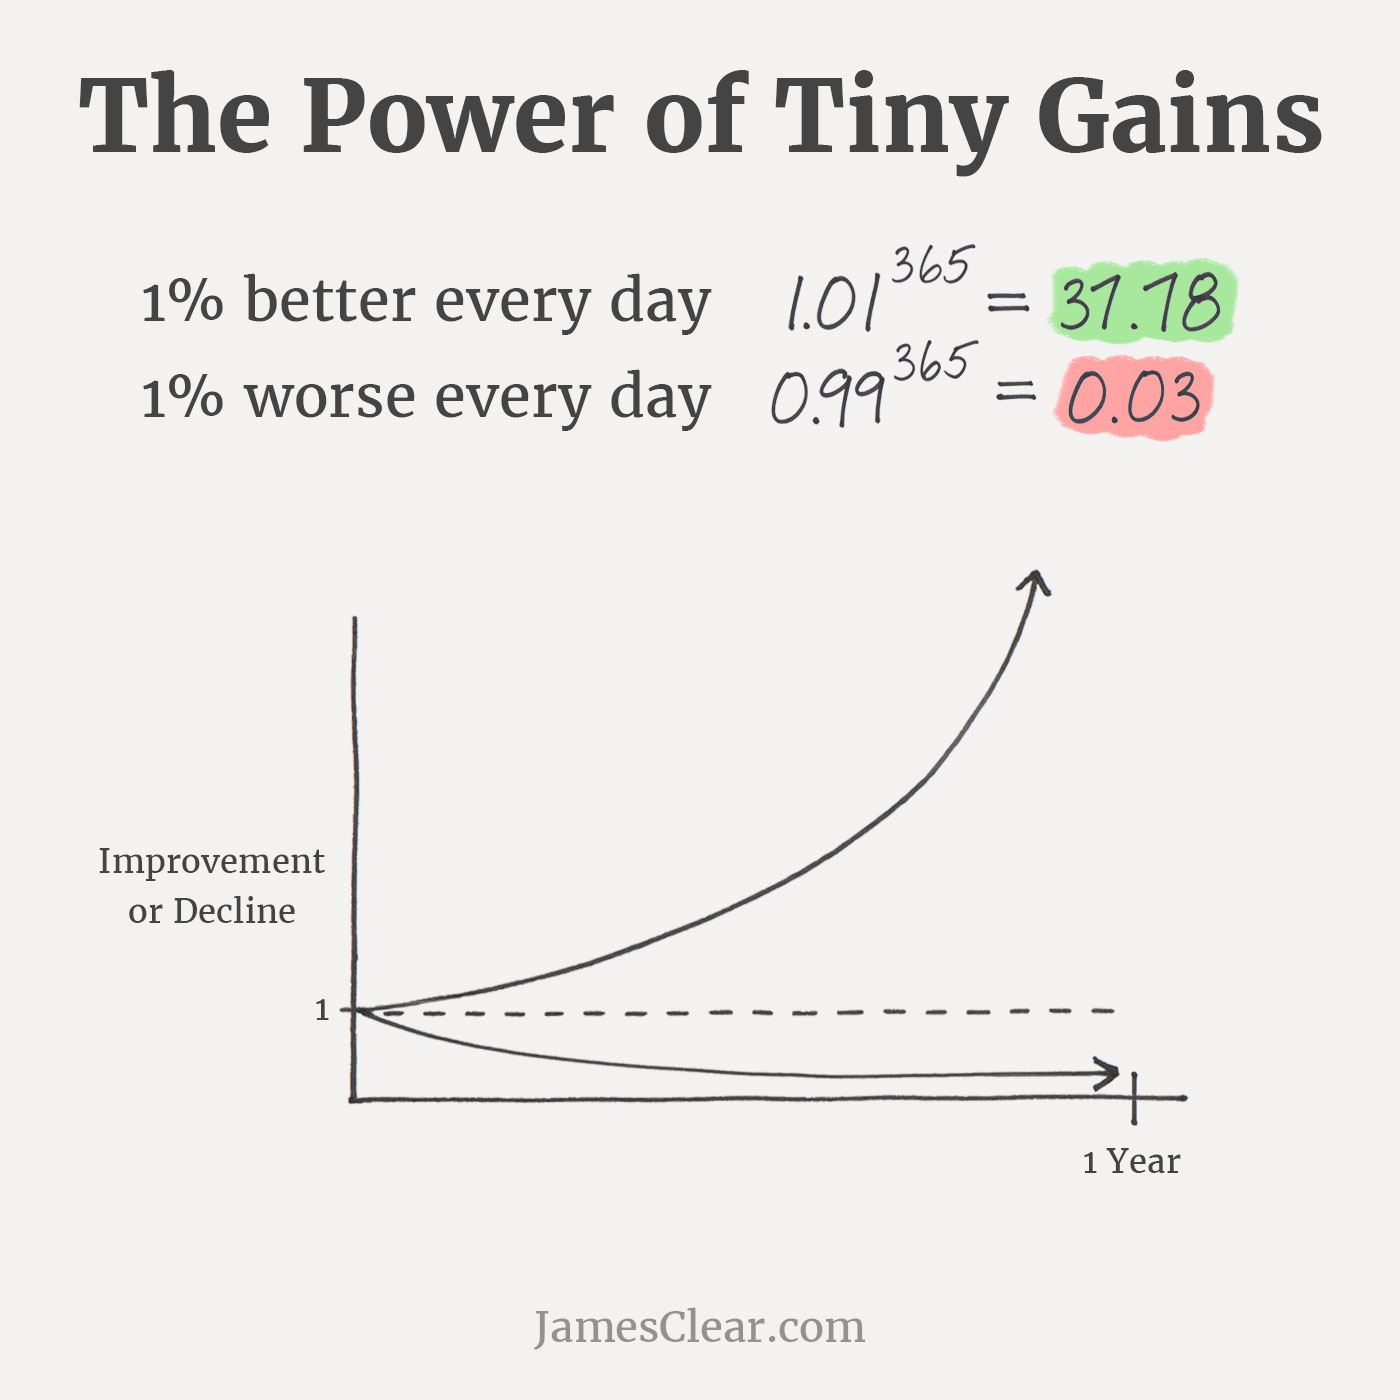 /images/tiny-gains-graph.jpg